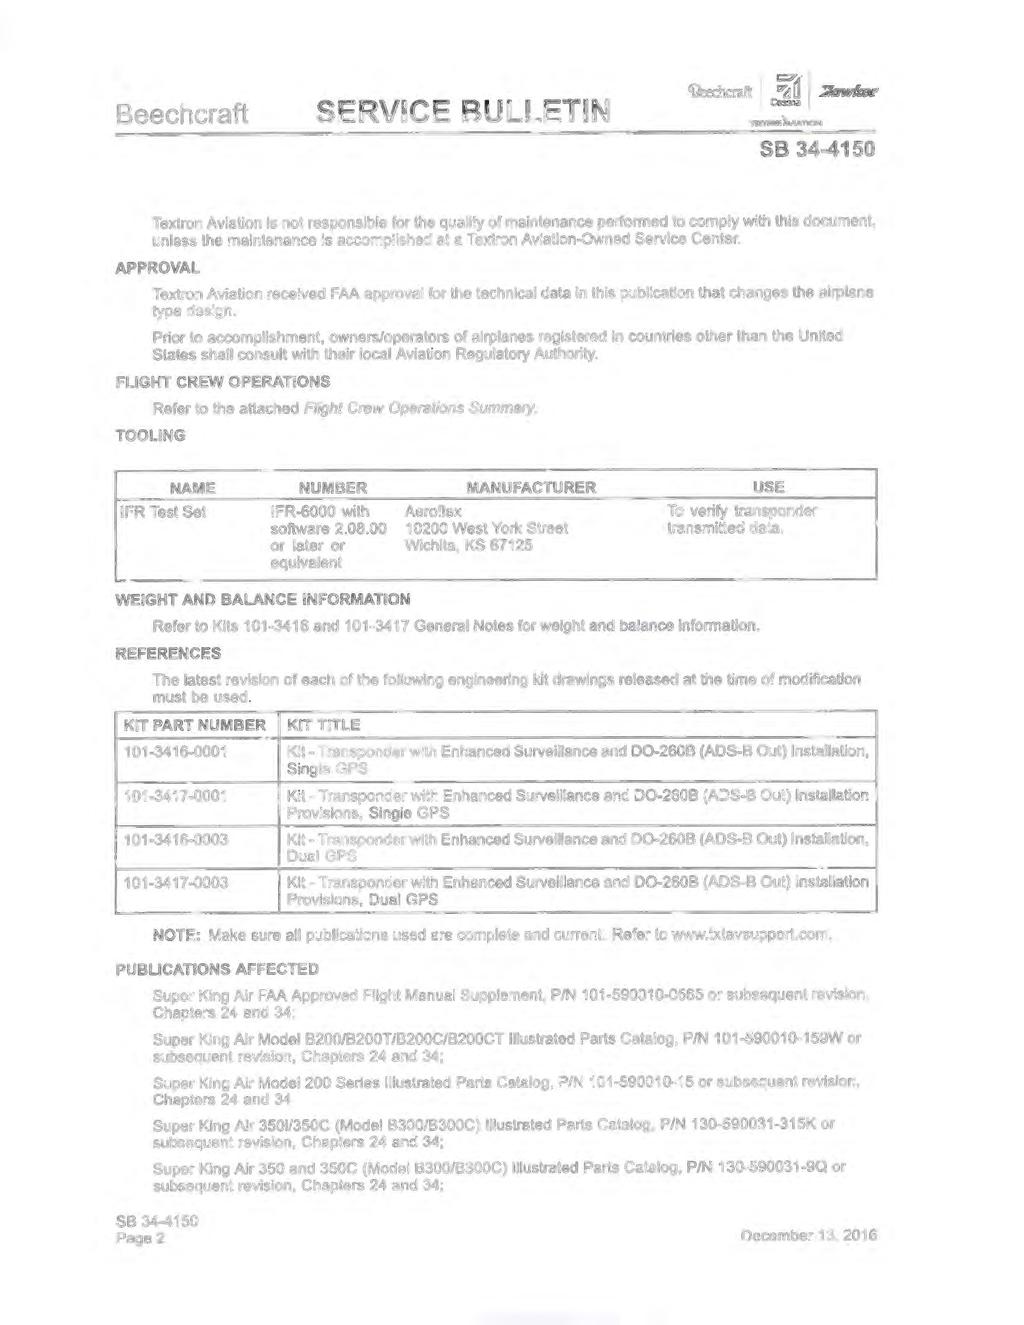 Beechcraft ~craft I ii-i ~ _,_~T>ON Textron Aviation is not responsible for the quality of maintenance performed to comply with this document, unless the maintenance Is accomplished at a Textron